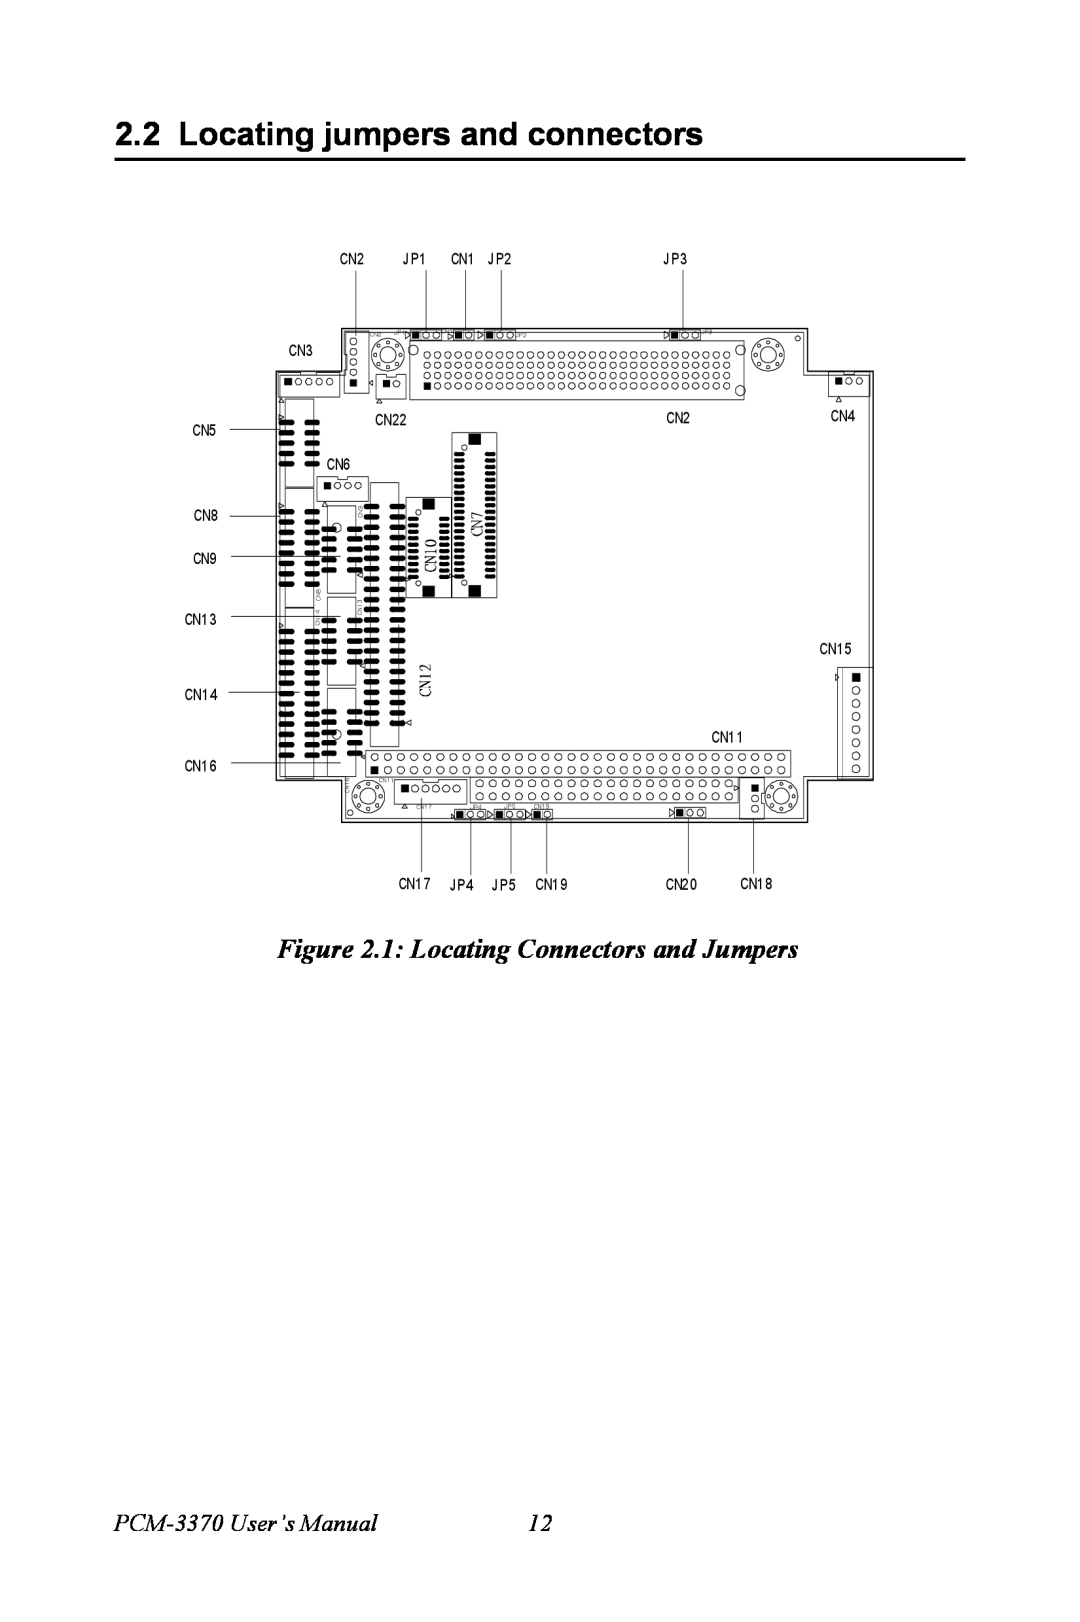 Intel user manual Locating jumpers and connectors, 1 Locating Connectors and Jumpers, PCM-3370 User’s Manual 